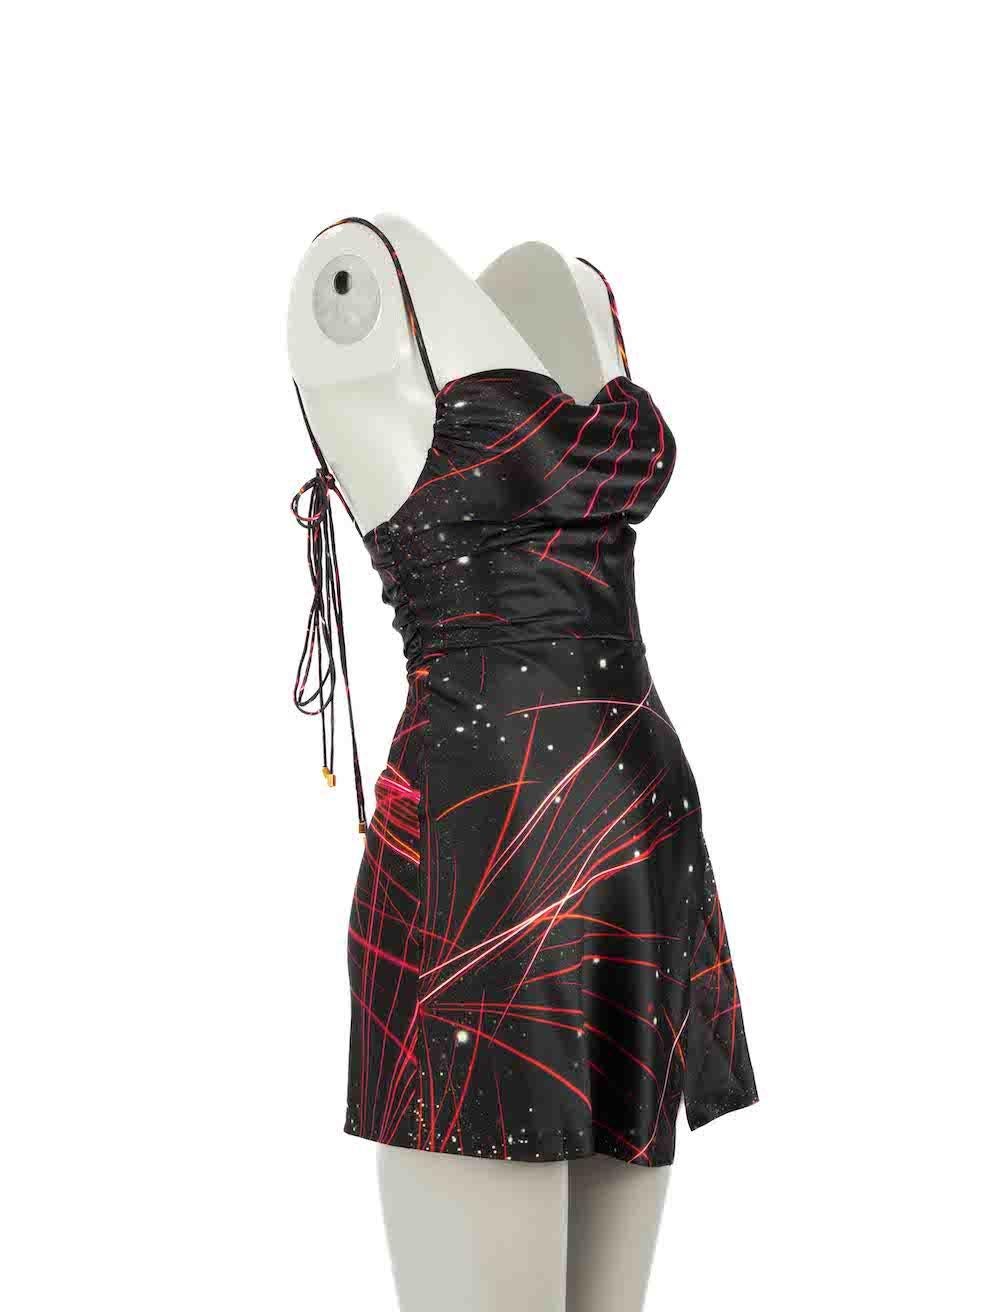 CONDITION is Never worn, with tags. No visible wear to dress is evident on this new Retrof√™te designer resale item.
 
Details
Black
Silk
Dress
Halterneck tie straps
Back tie straps
Mini
Firework pattern
Open back
 
Made in China
 
Composition
95%